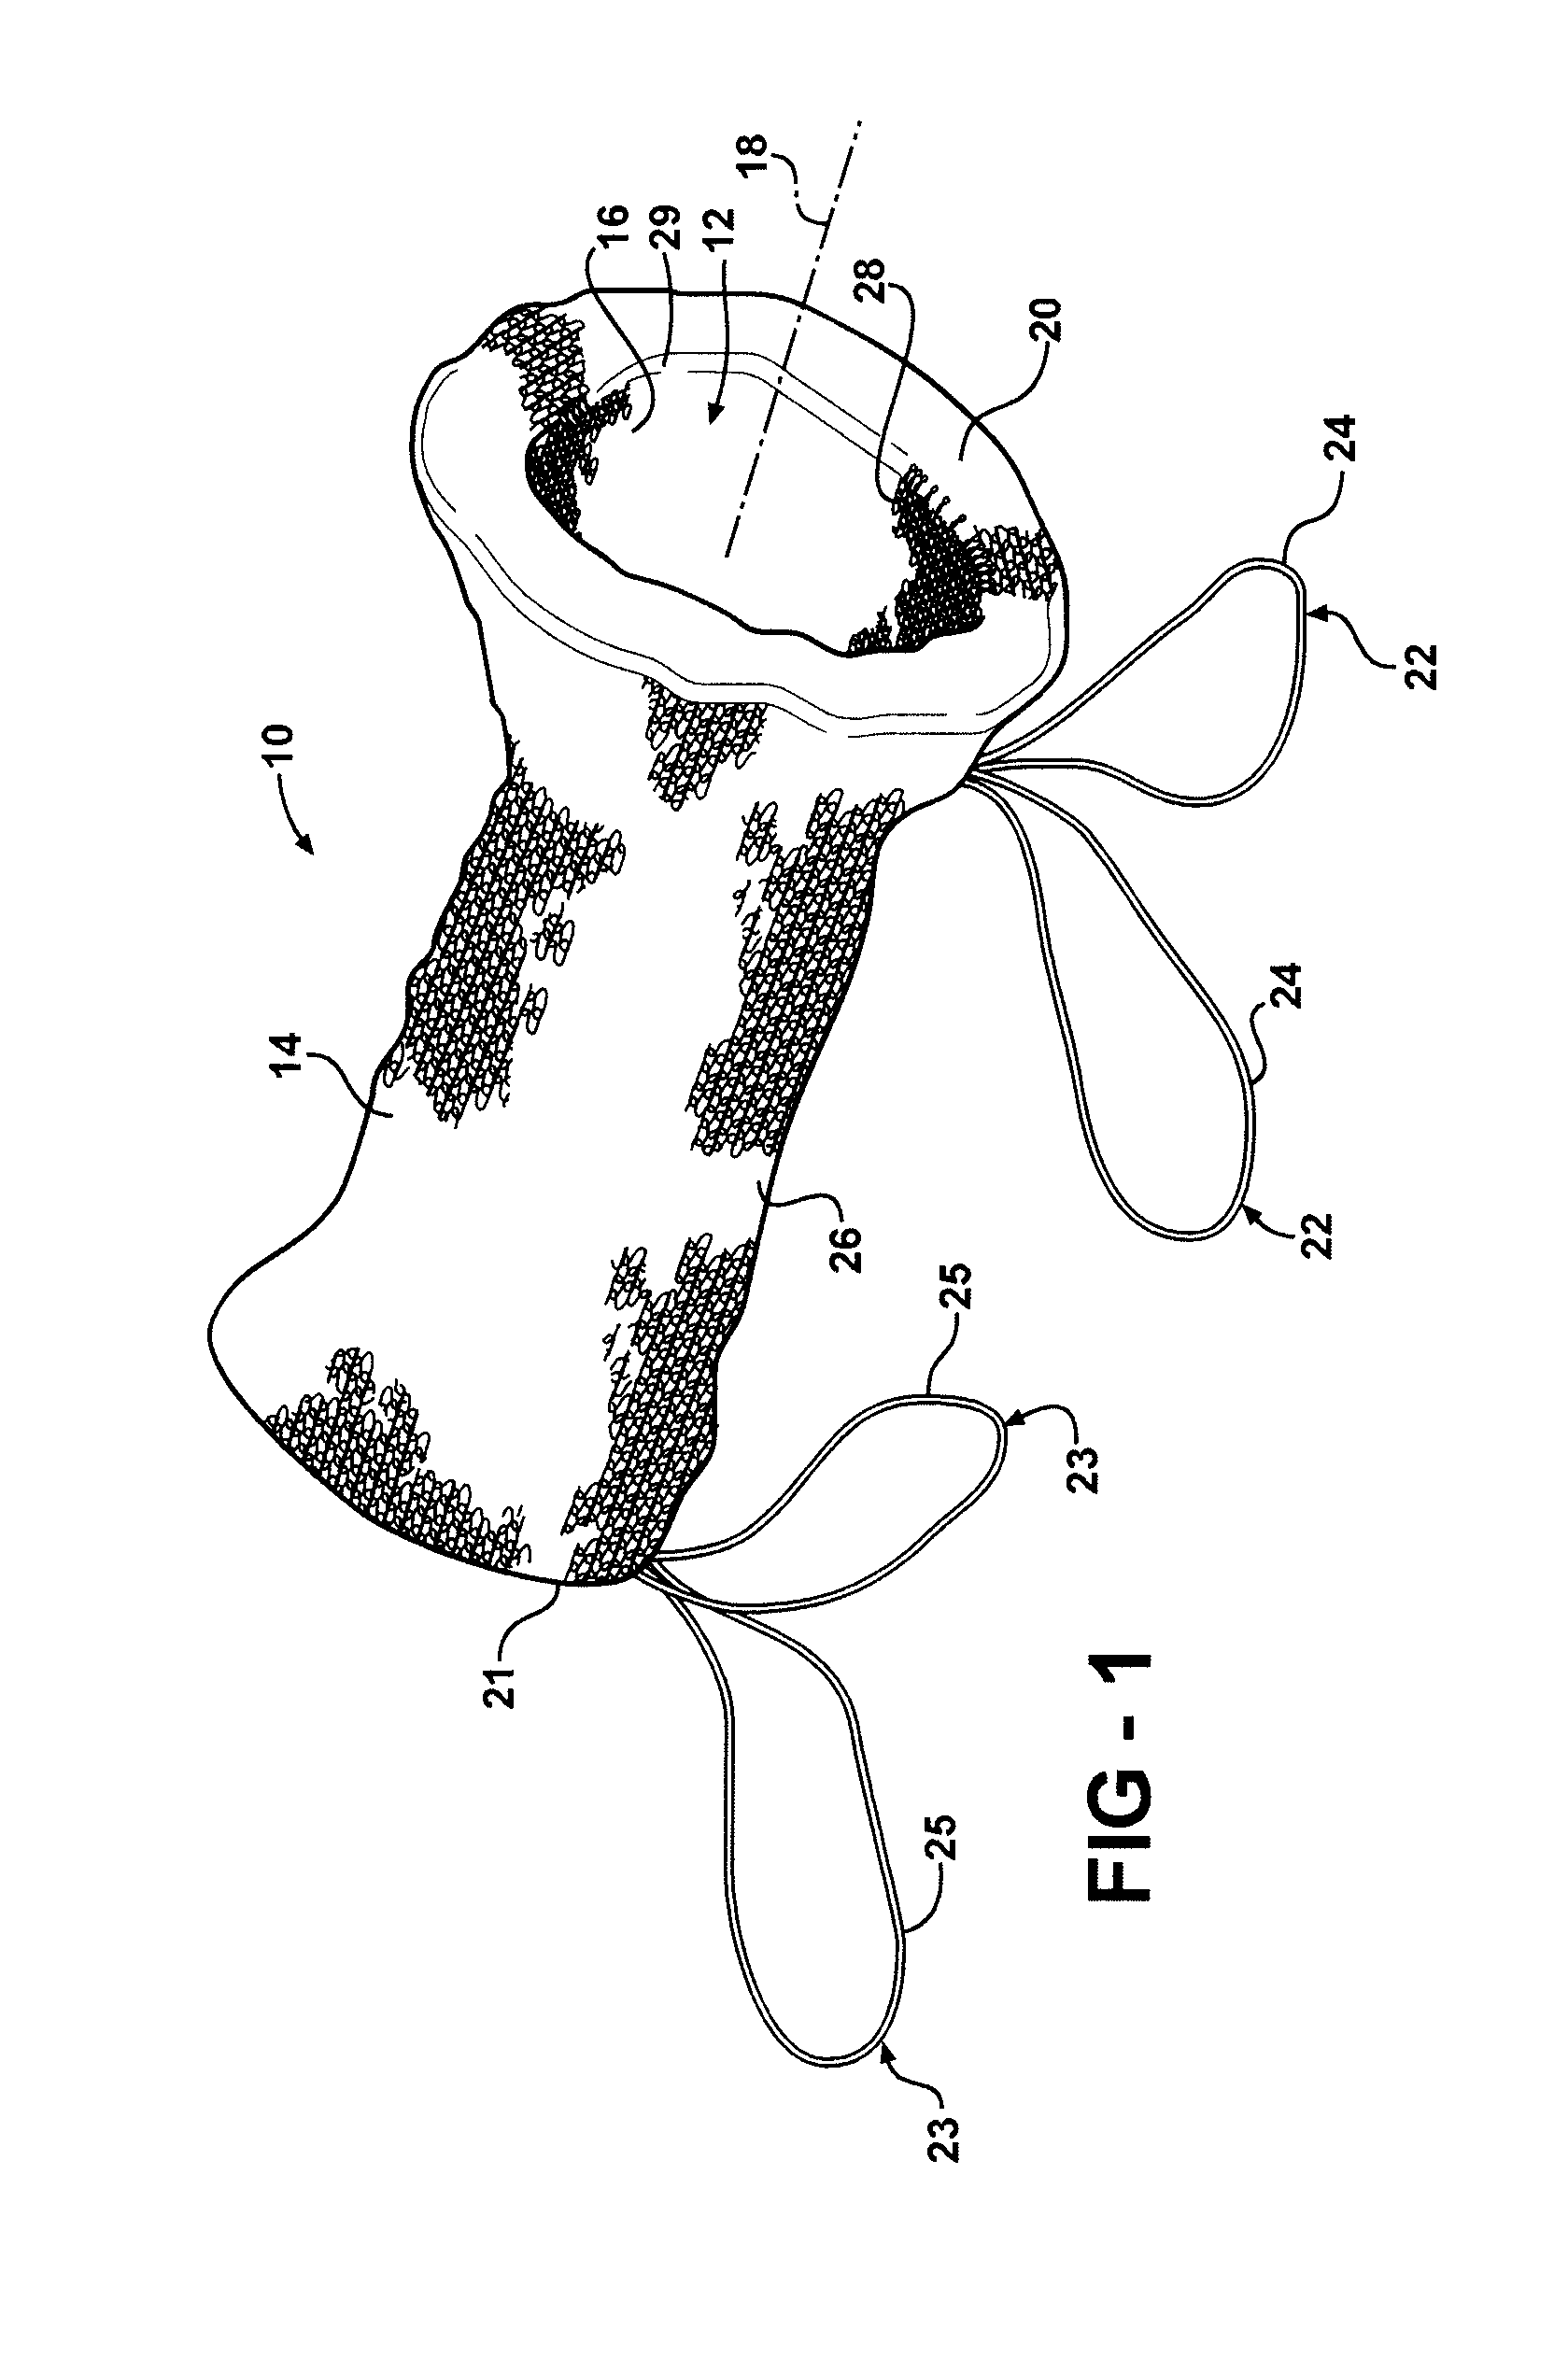 Protective sleeve assembly having an integral closure member and methods of manufacture and use thereof